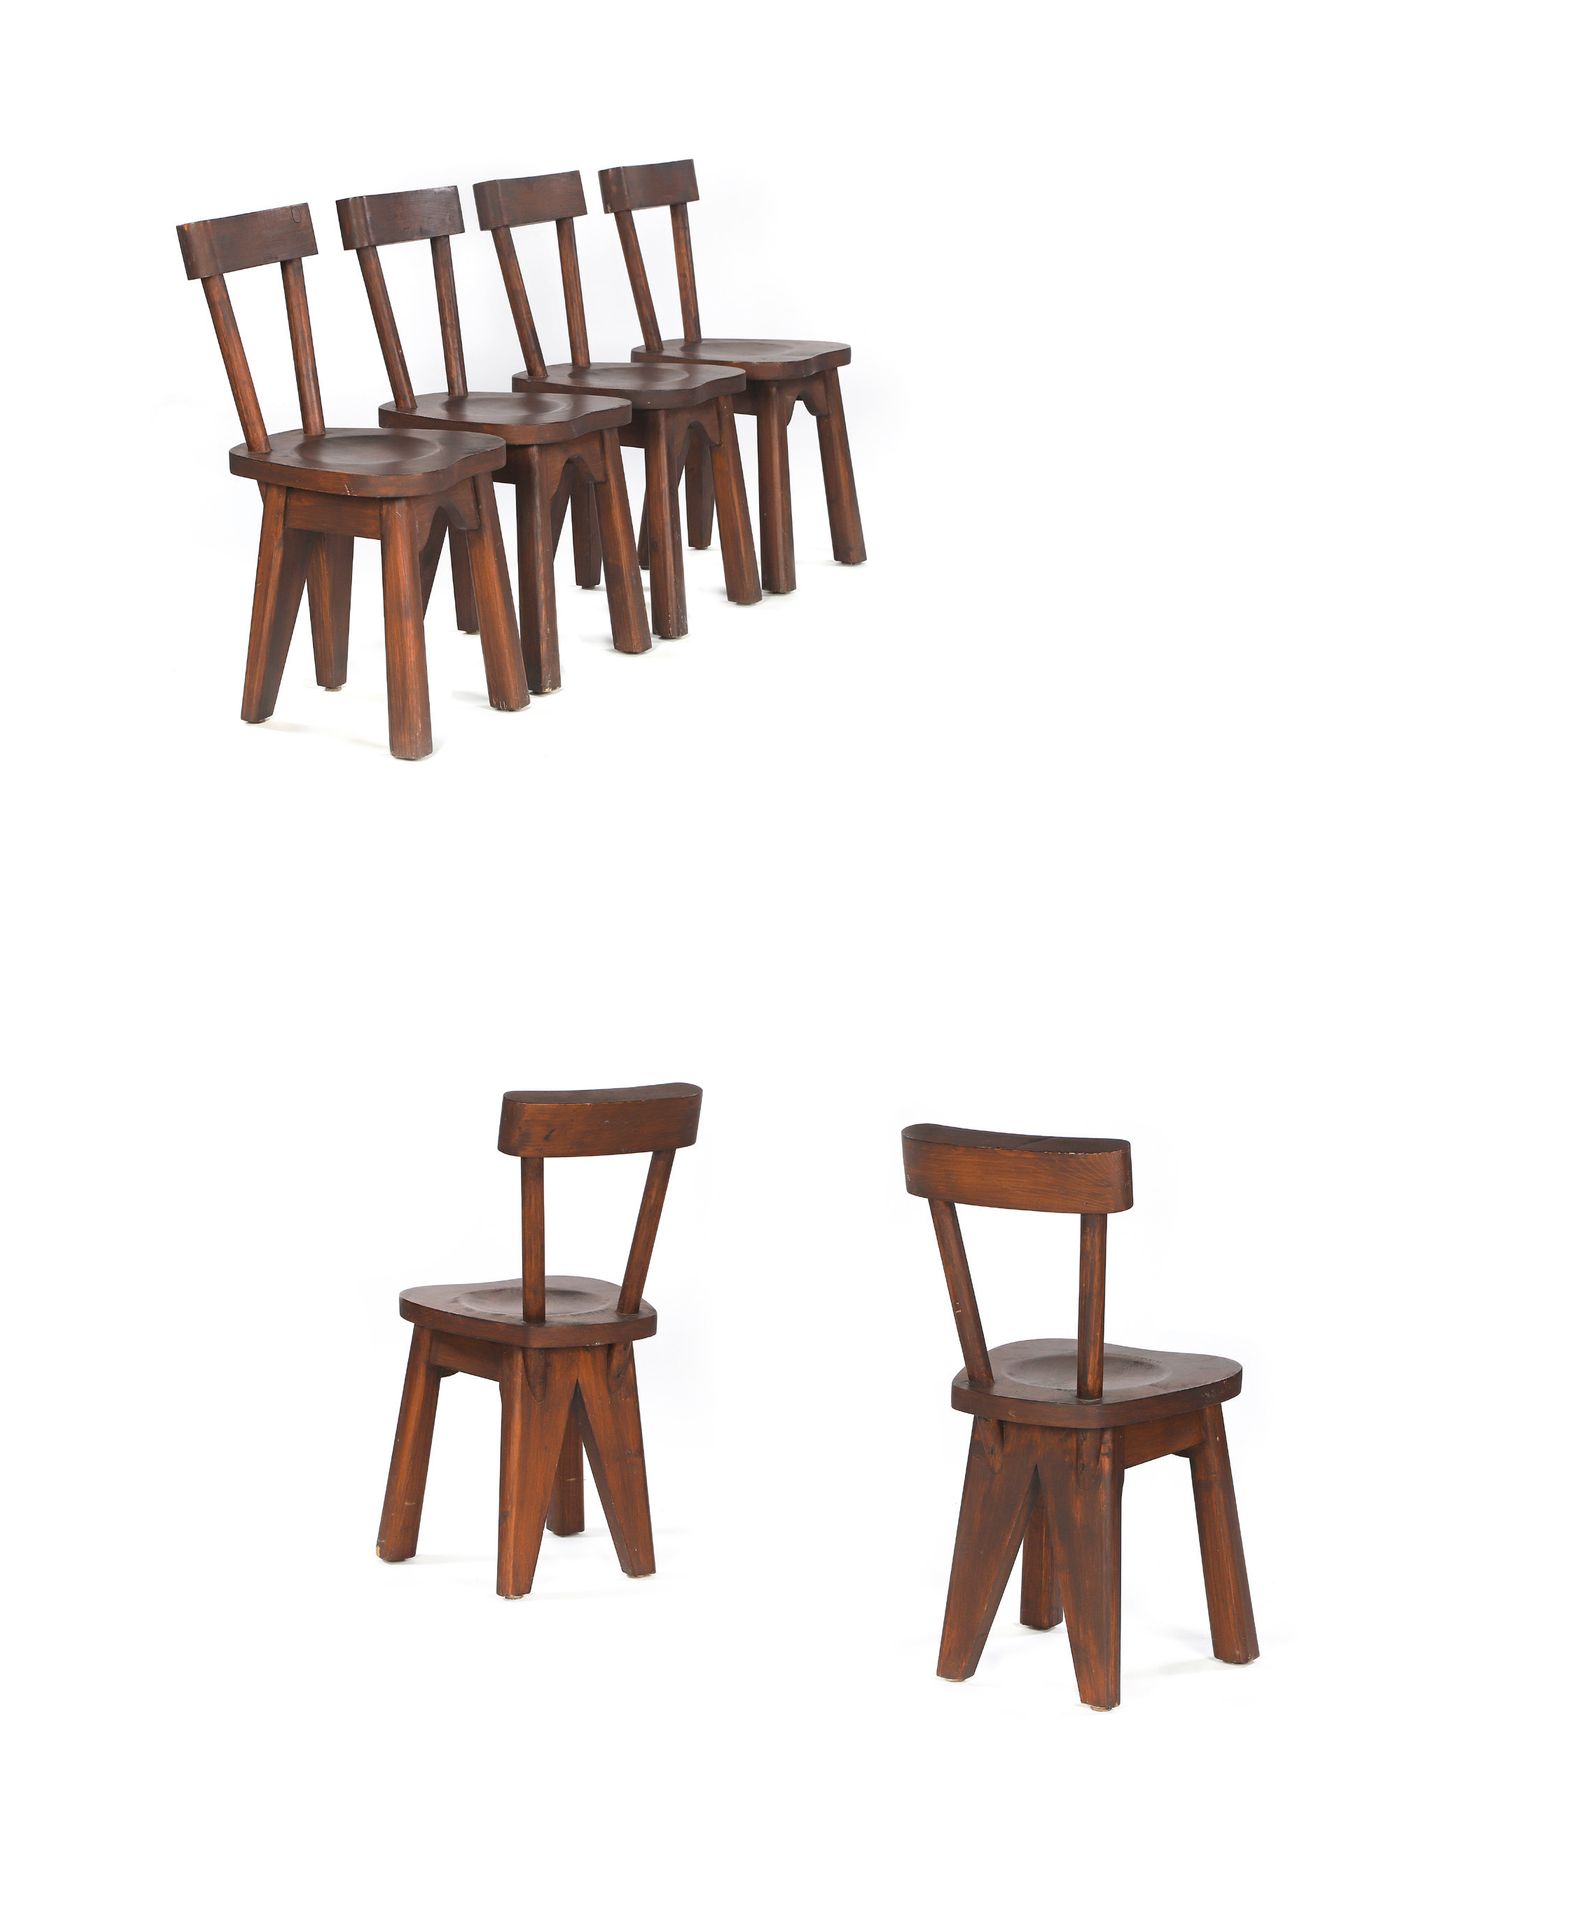 Null René FAUBLEE (1906-1991)

Suite of 6 chairs Tinted pine

80 x 40 x 37 cm. C&hellip;